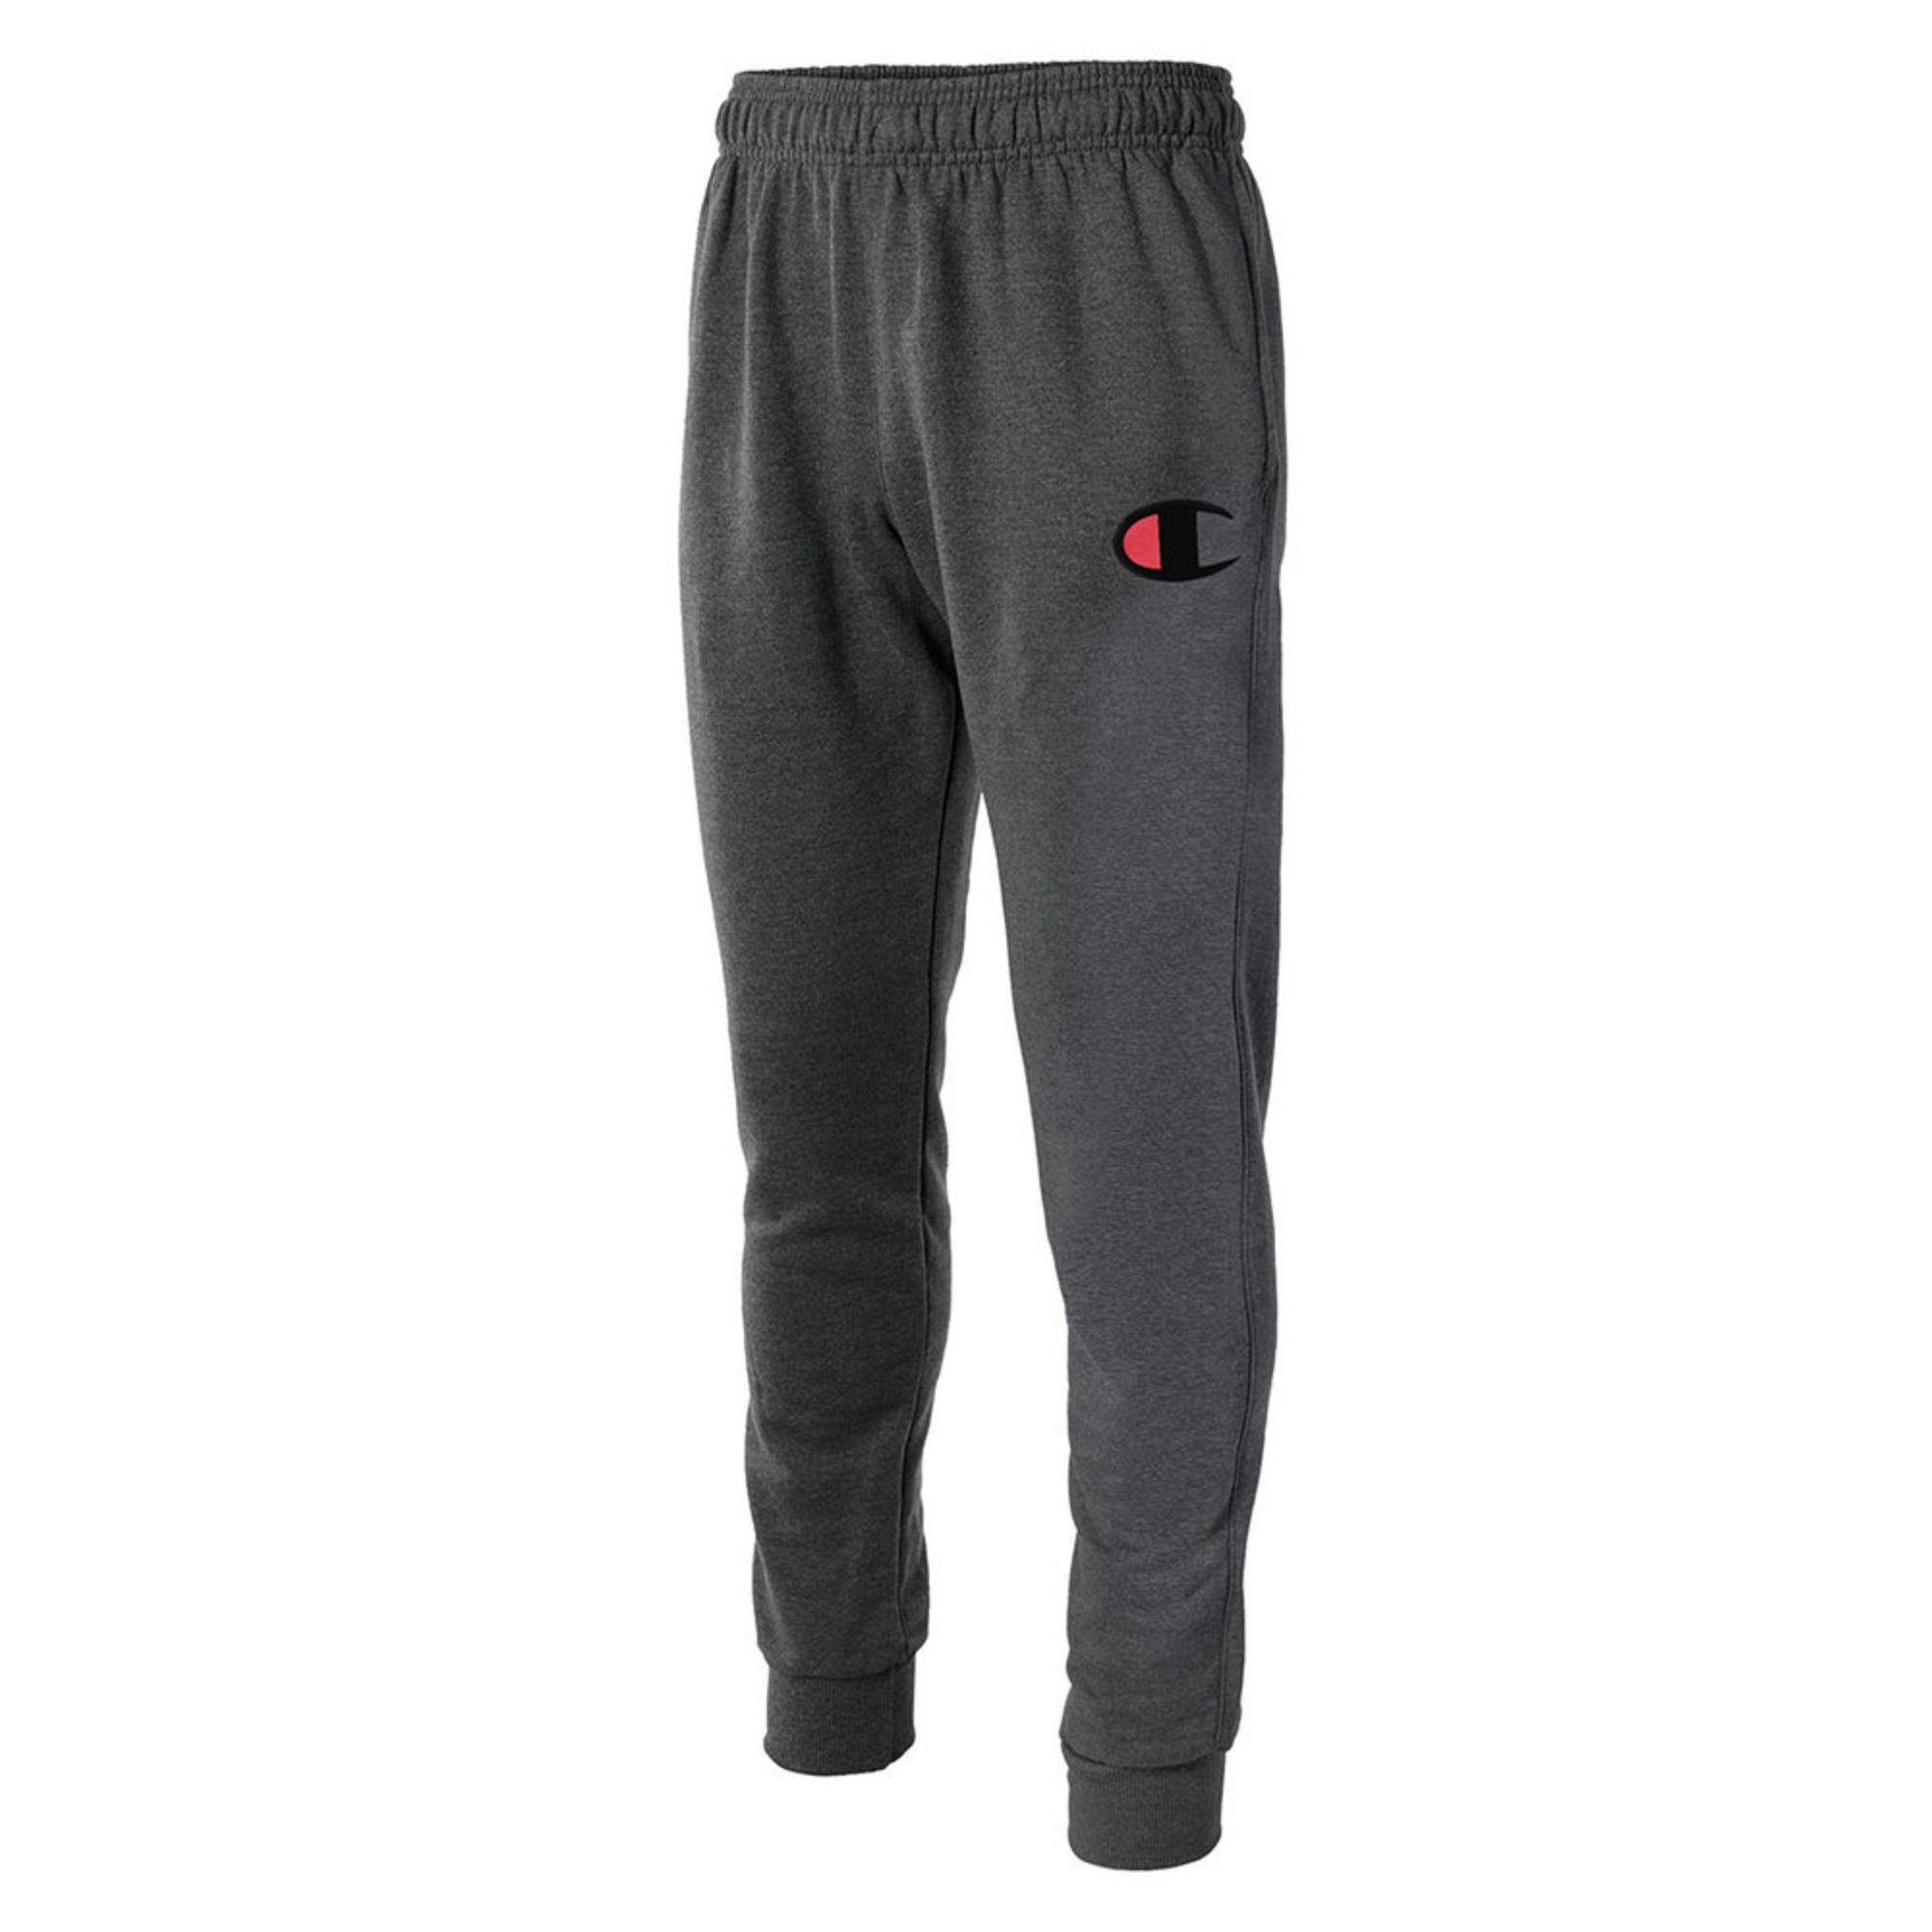 champion sweatpants men's jersey joggers side pockets comfortable athletic fit